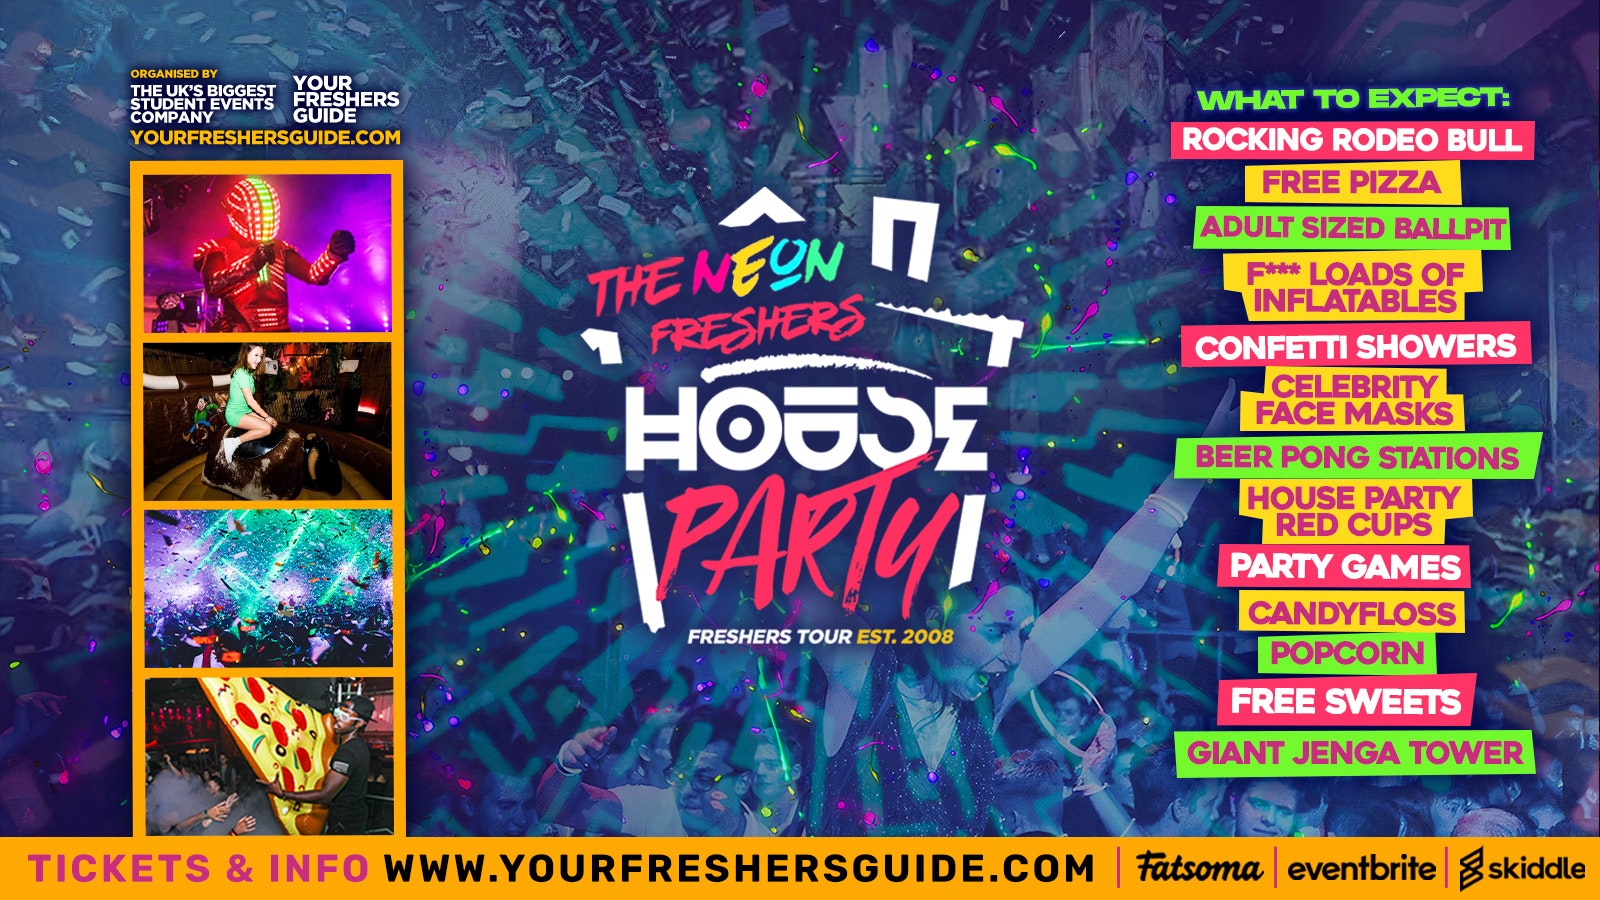 Neon Freshers House Party / Chester Freshers 2022 – Returners Tickets!